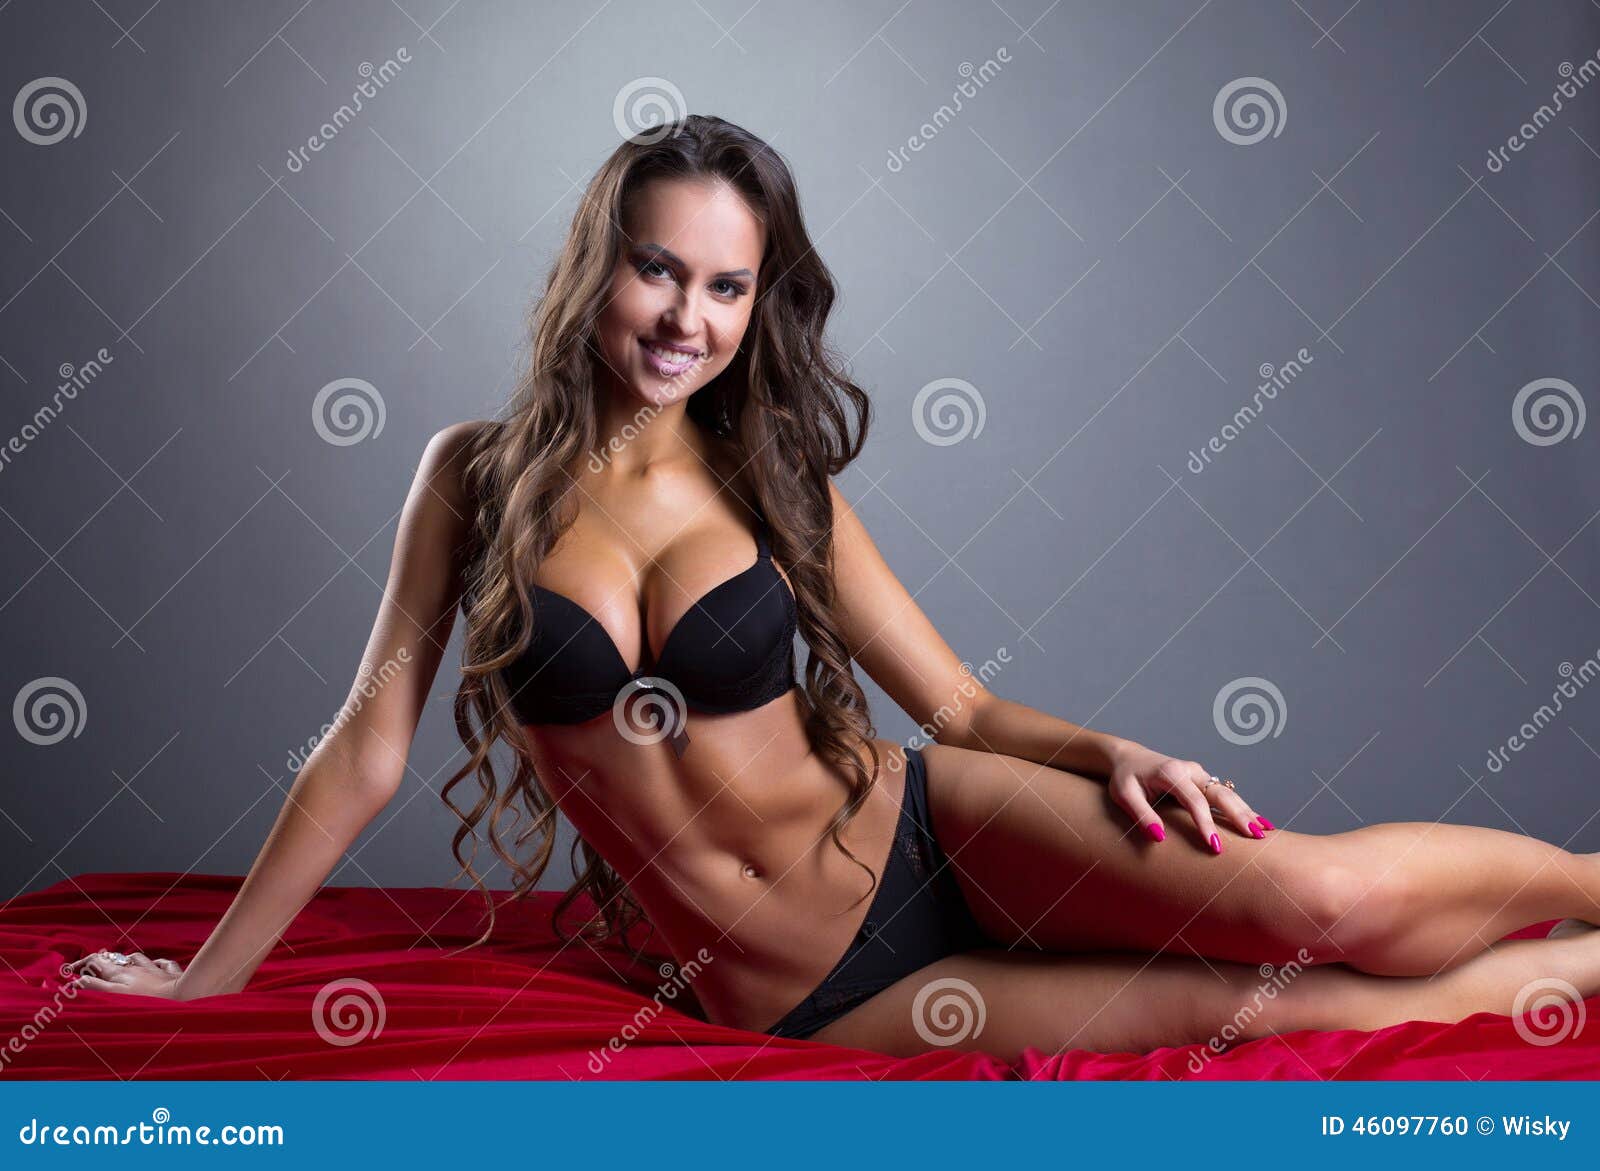 Smiling Athletic Model Posing in Lingerie Stock Photo - Image of